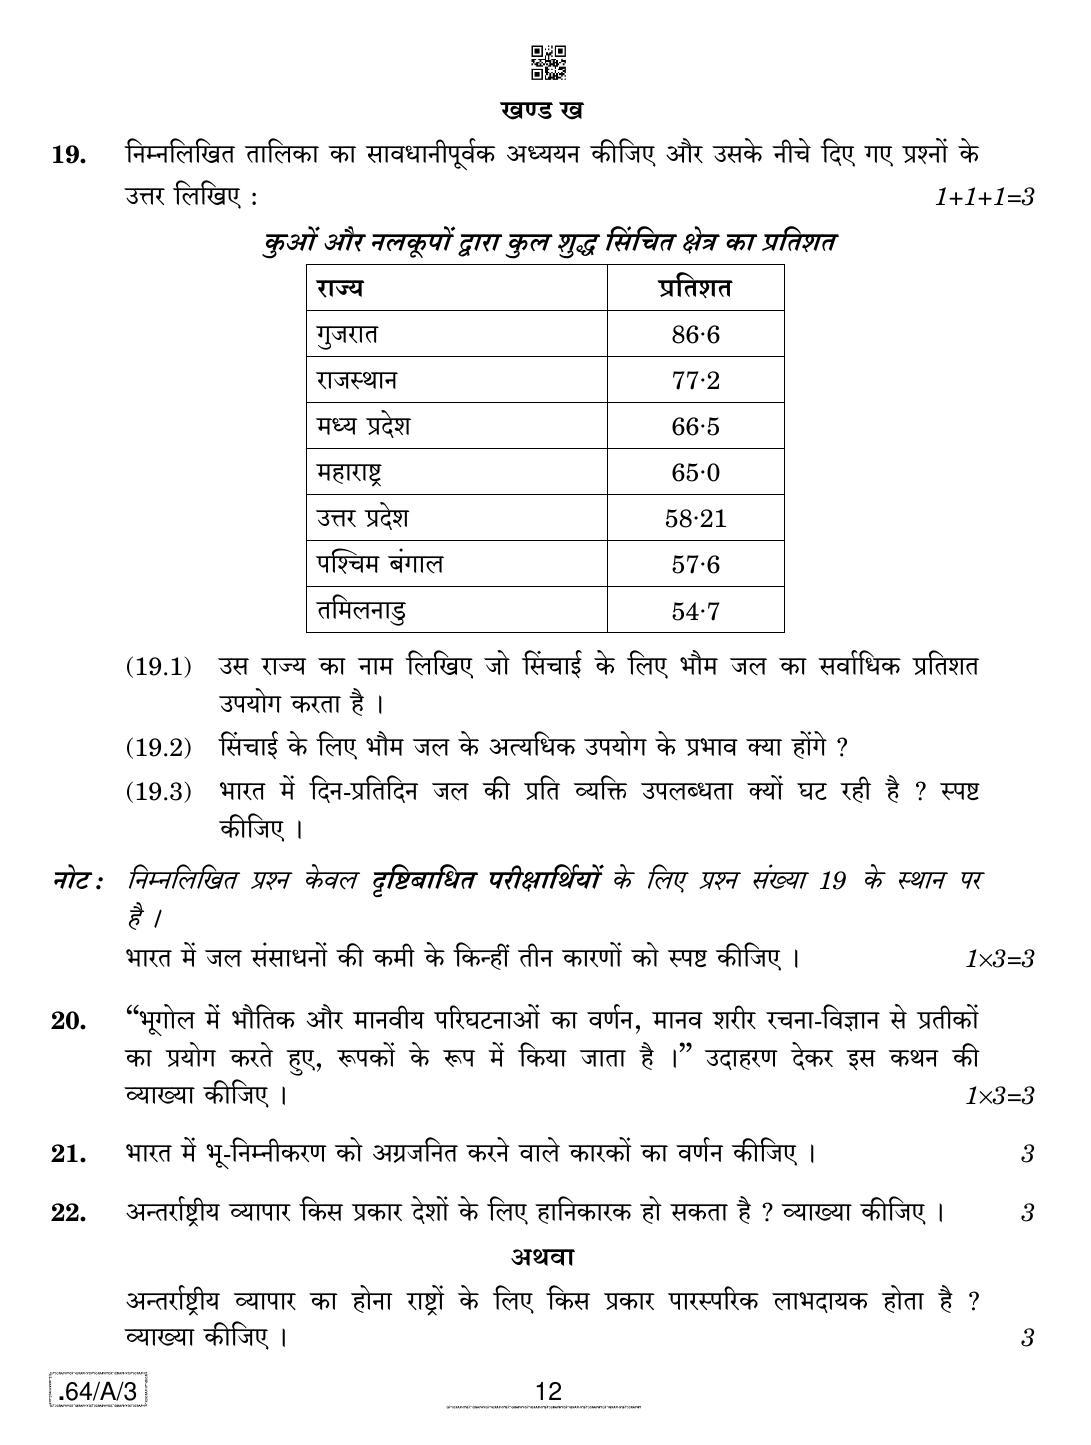 CBSE Class 12 64-C-3 - Geography 2020 Compartment Question Paper - Page 12